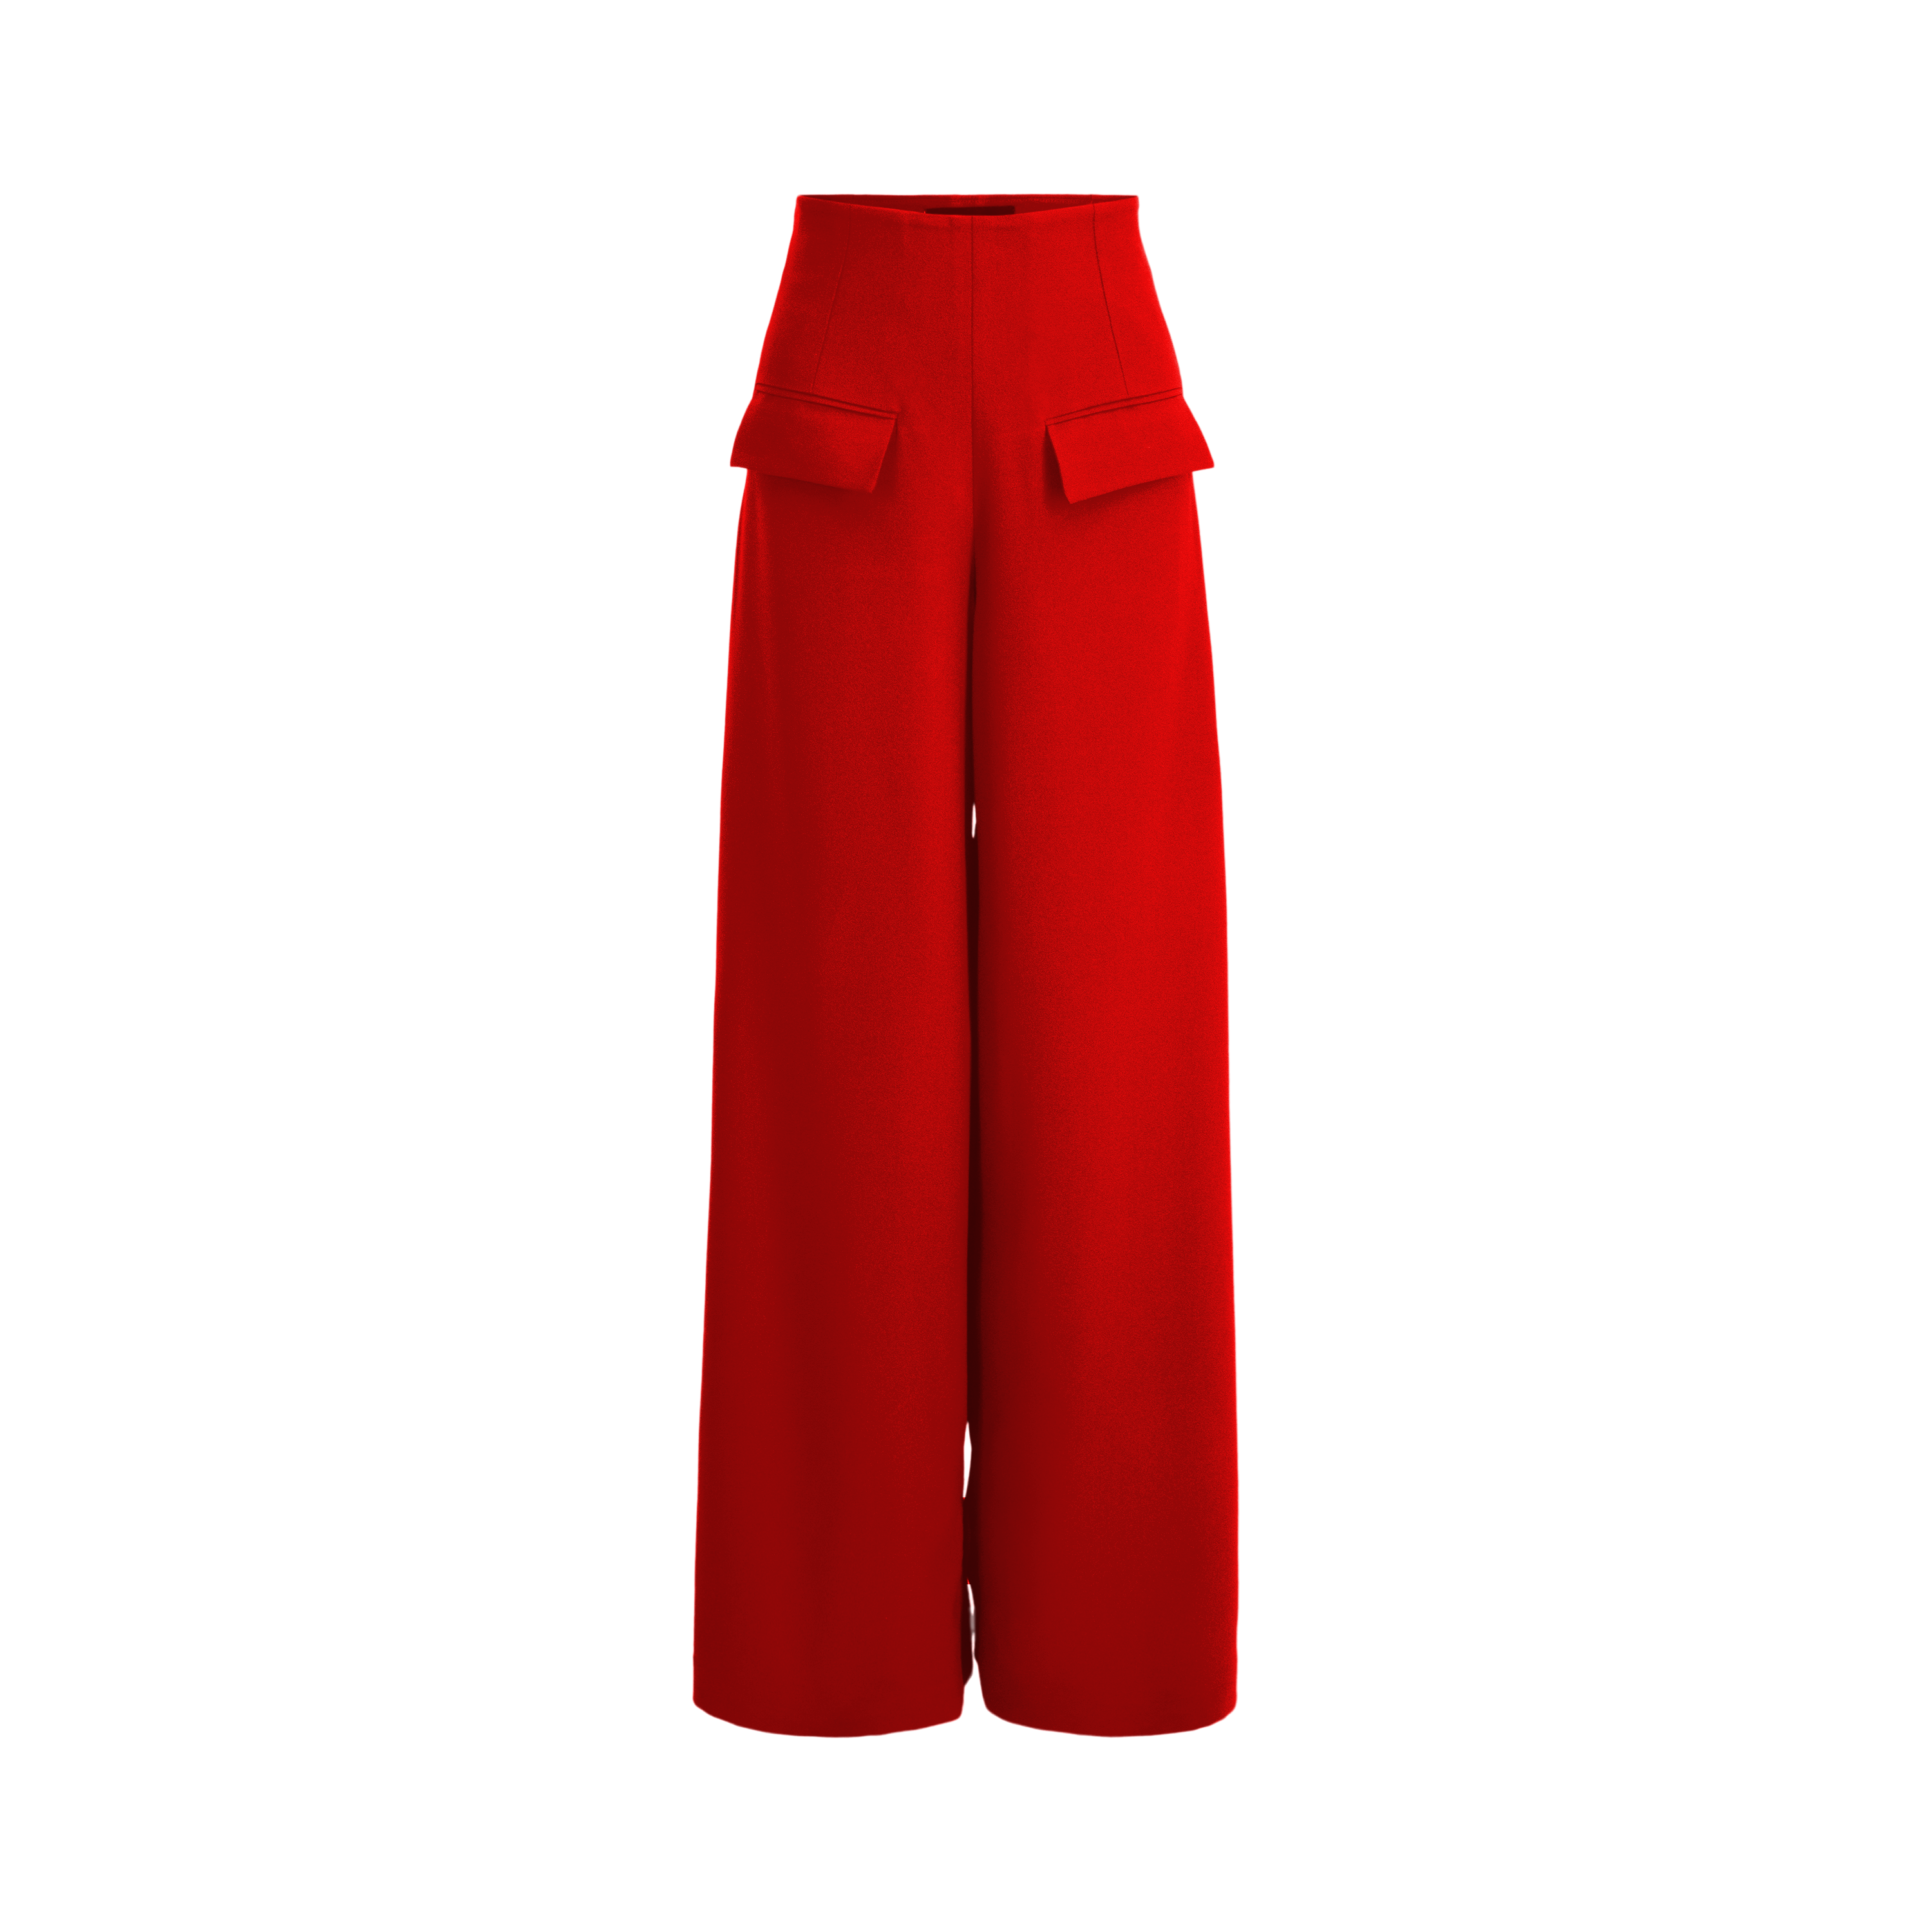 Eve Red Flowy Pants - Women's Resort Clothing – Hermoza